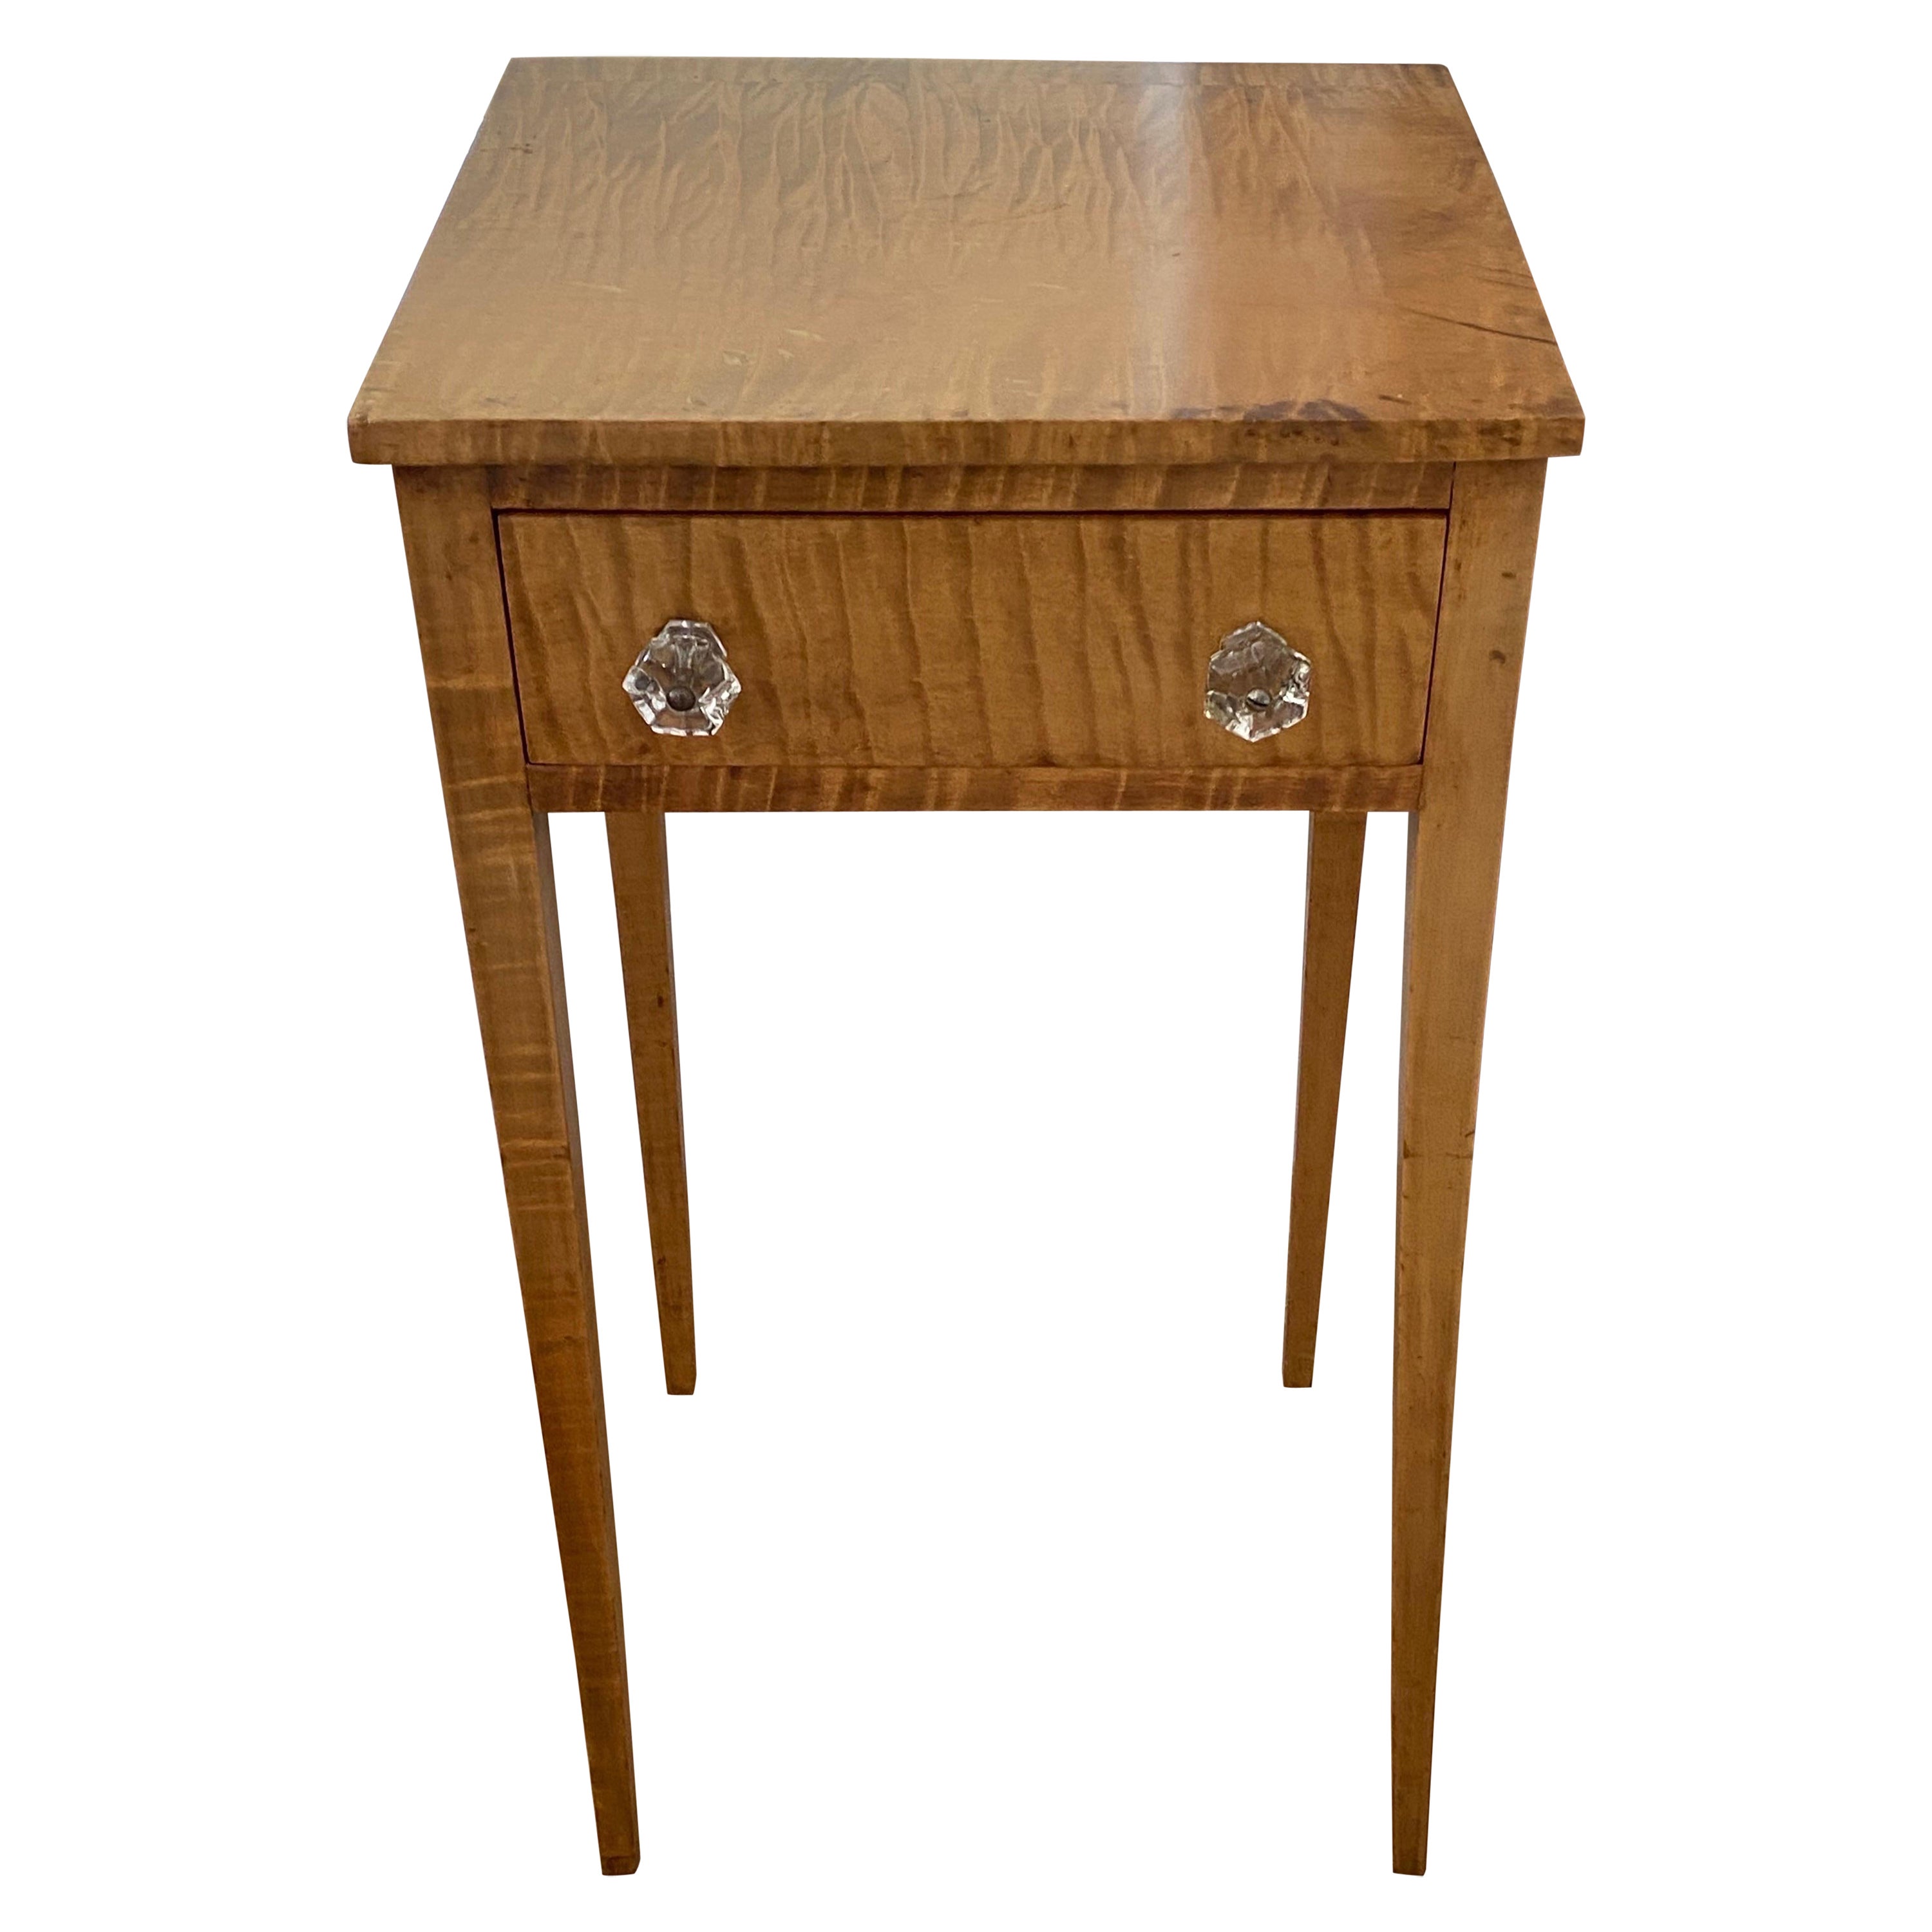 19th Century American Sheraton Tiger Maple Single Drawer Stand with Glass Knobs For Sale